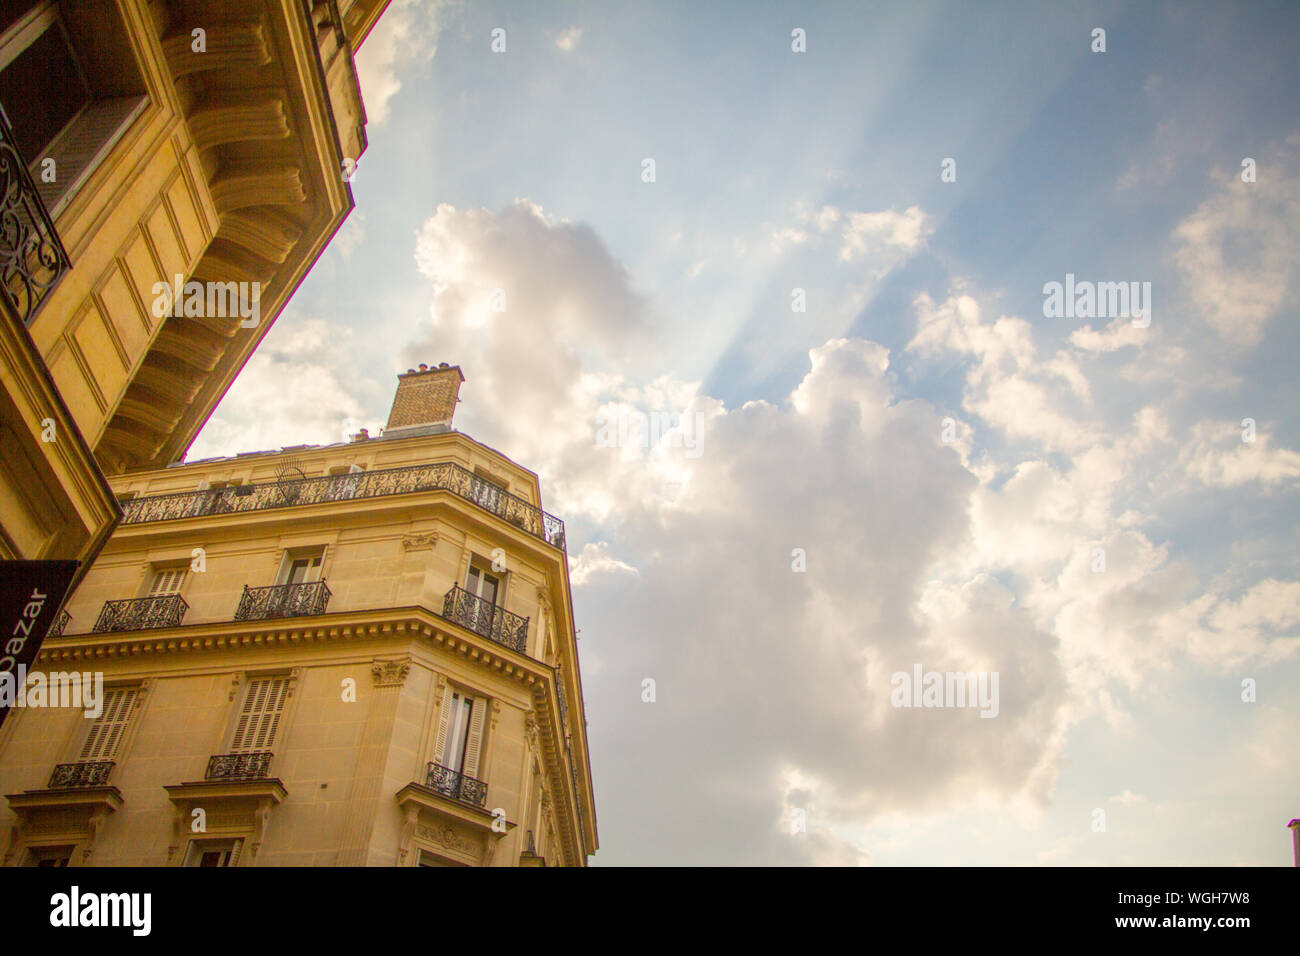 Paris, France - July 7, 2018: Soufflot street from Pantheon Square to the Luxembourg Gardens in central Paris Stock Photo